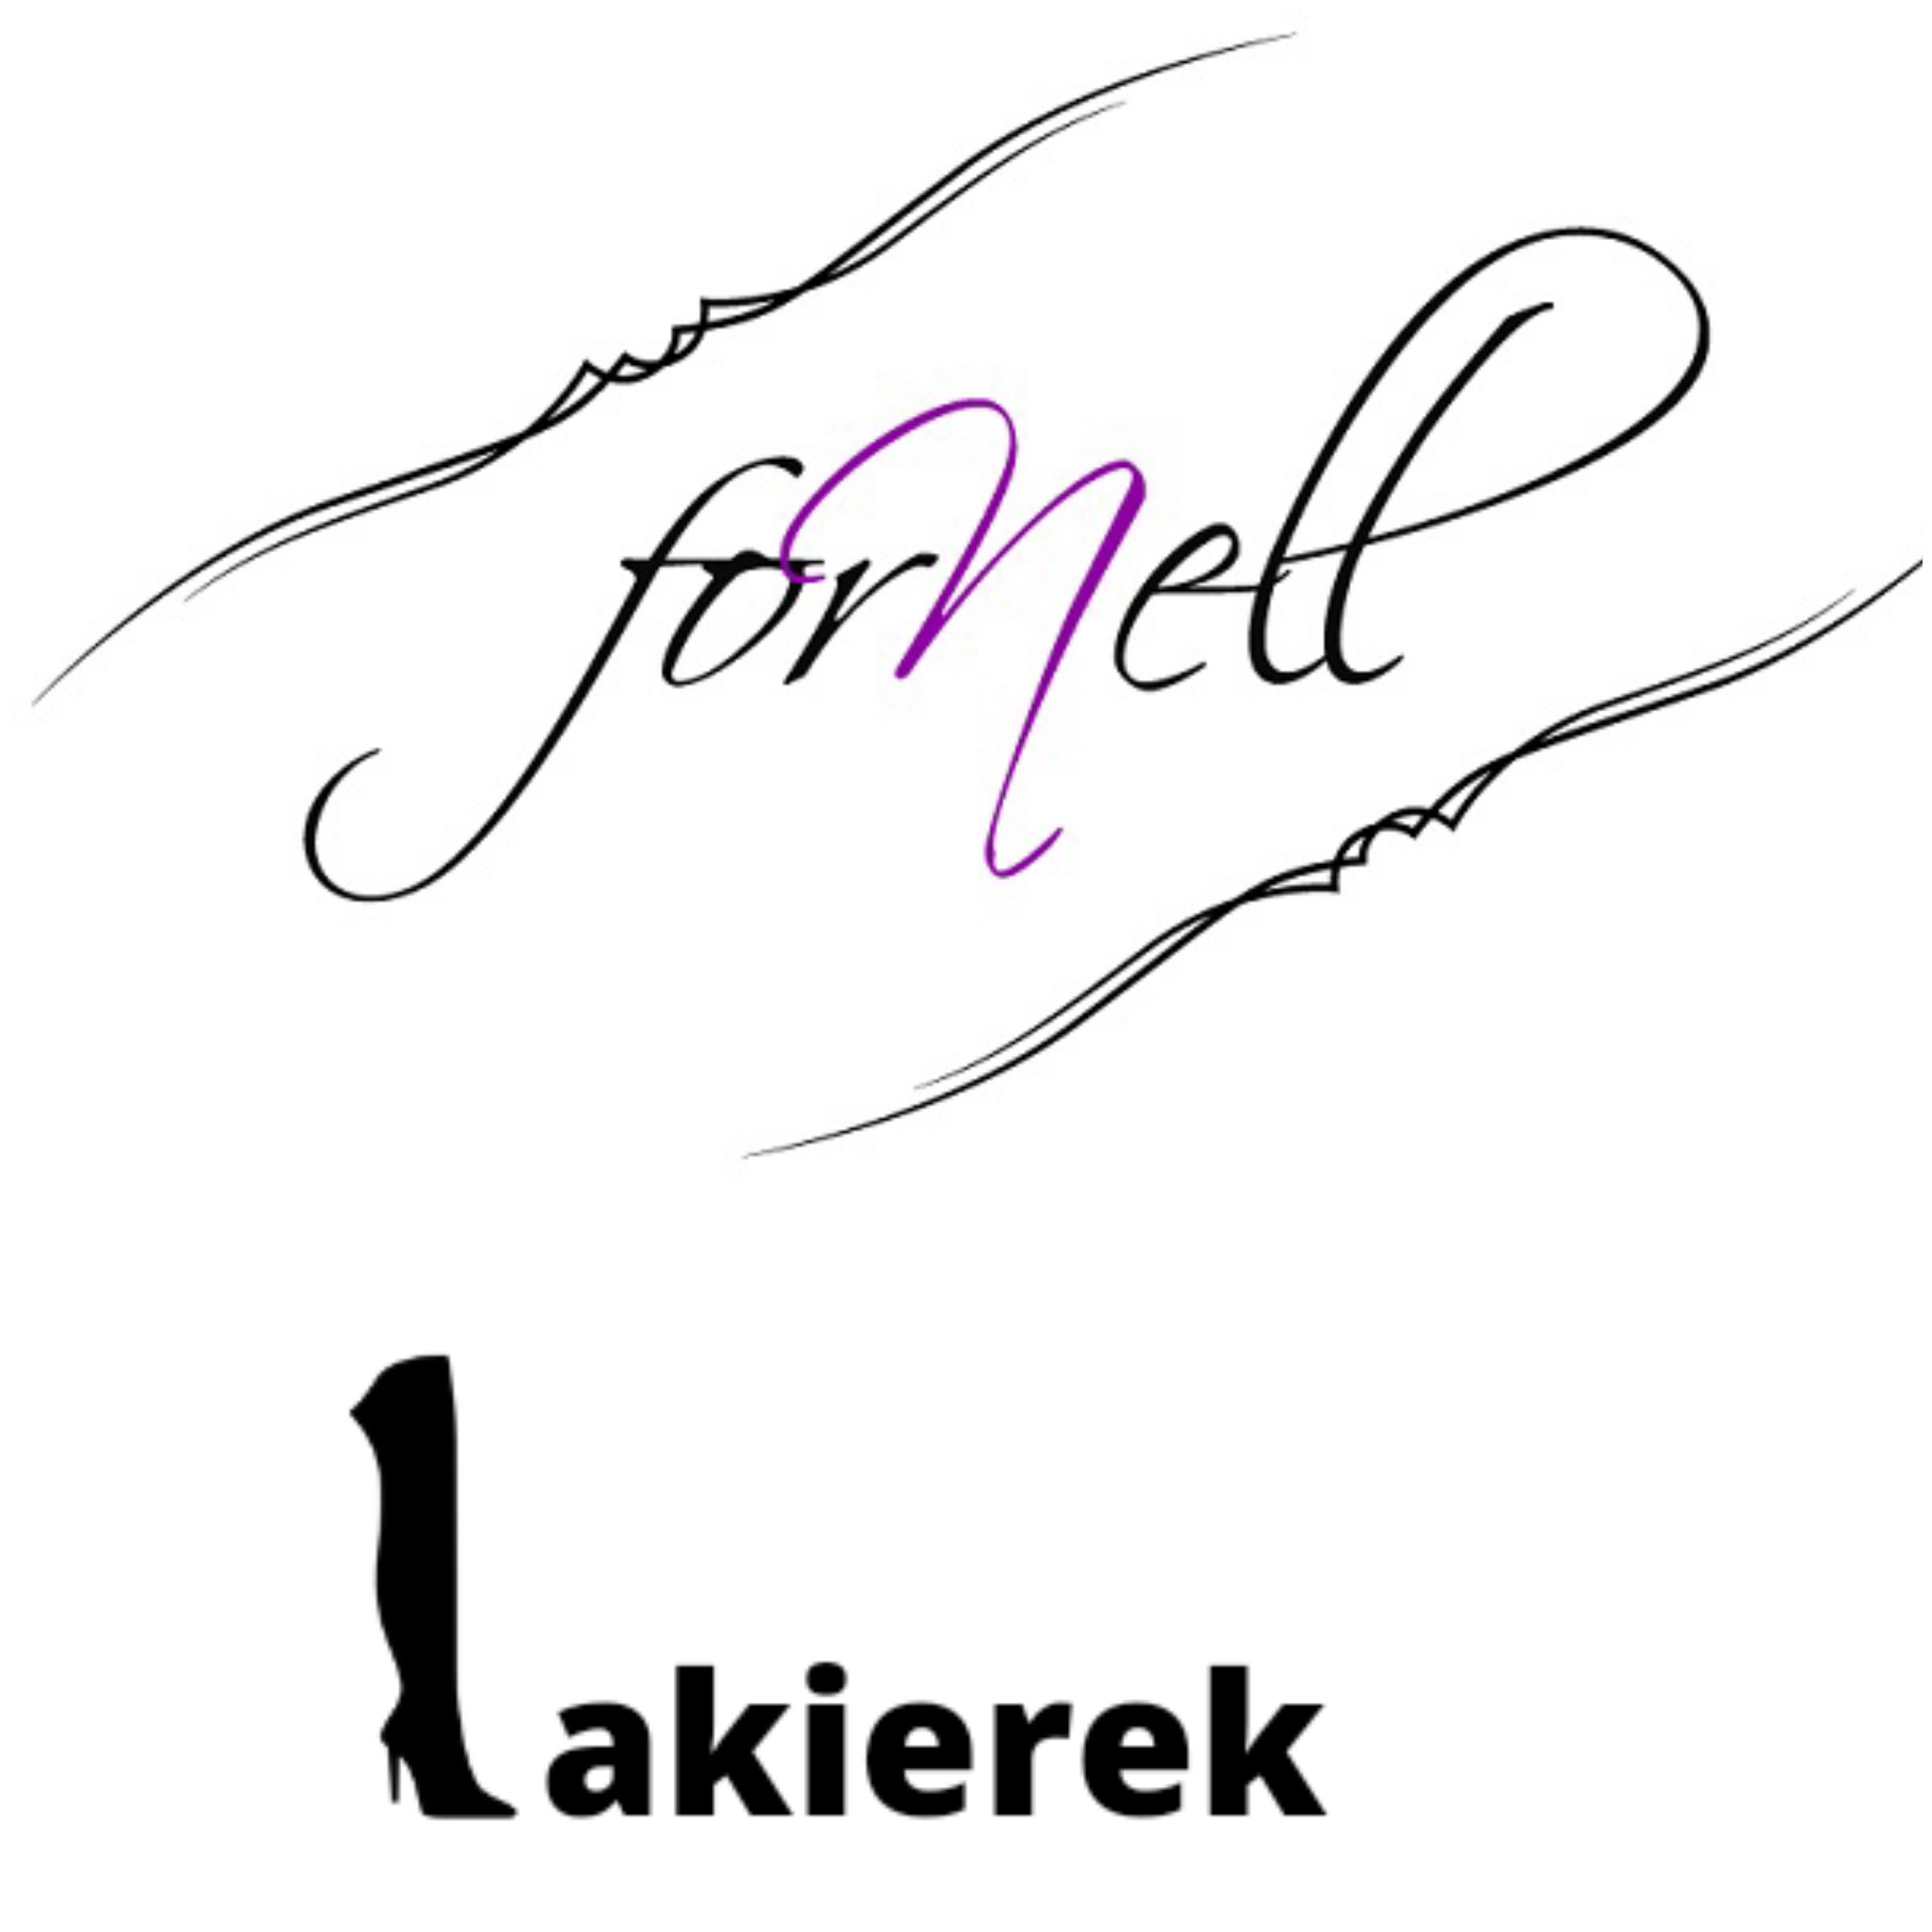 FORNELL